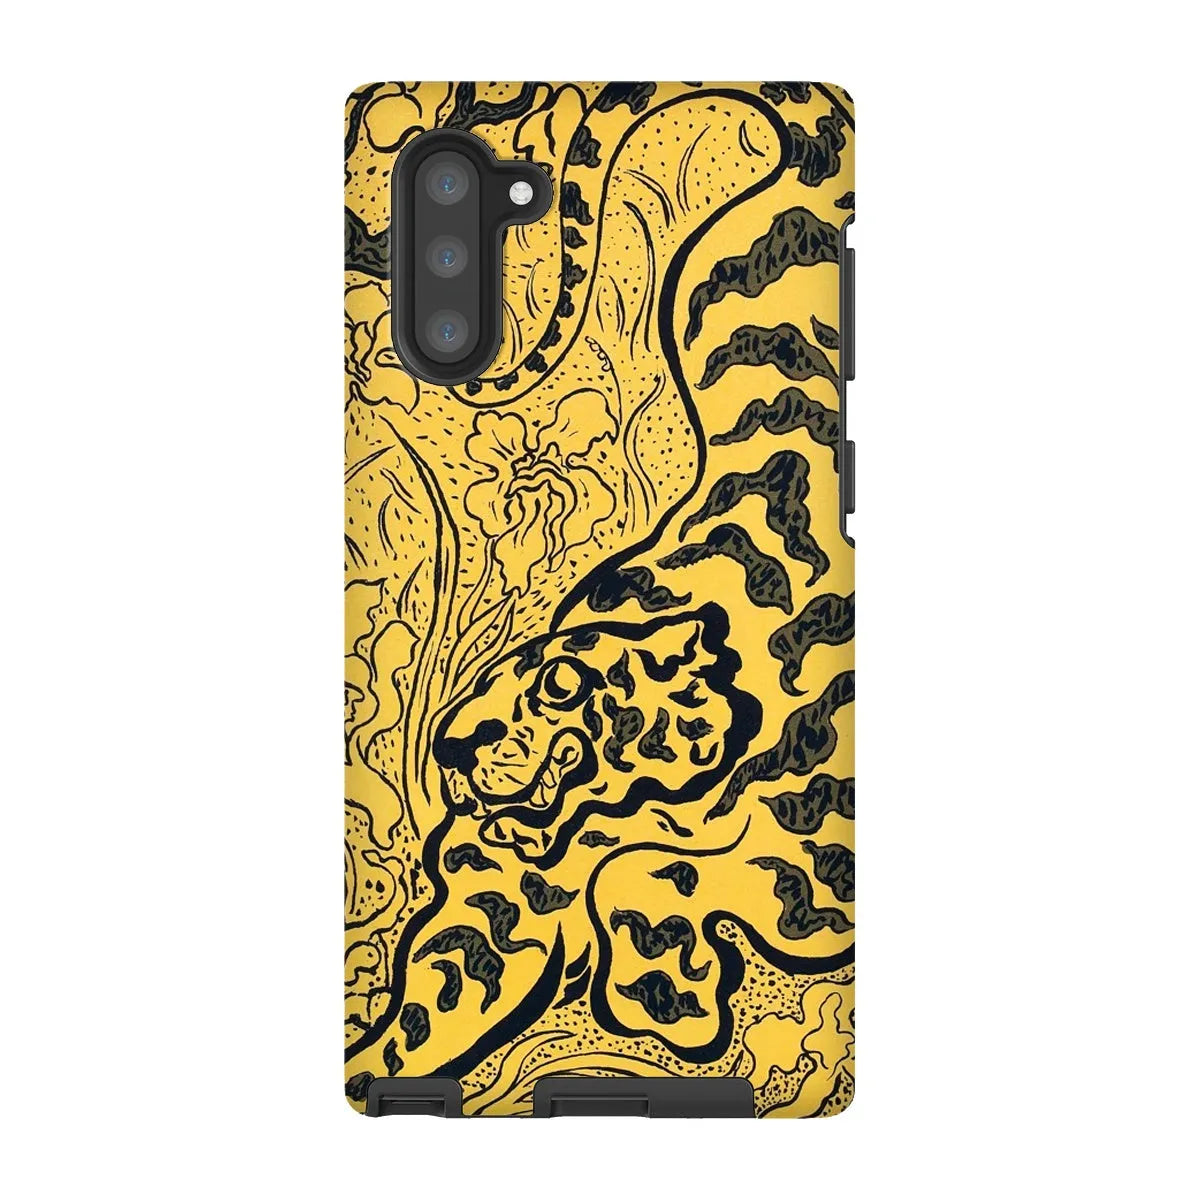 Tiger In The Jungle - Graphic Art Phone Case - Paul Ranson - Samsung Galaxy Note 10 / Matte - Mobile Phone Cases